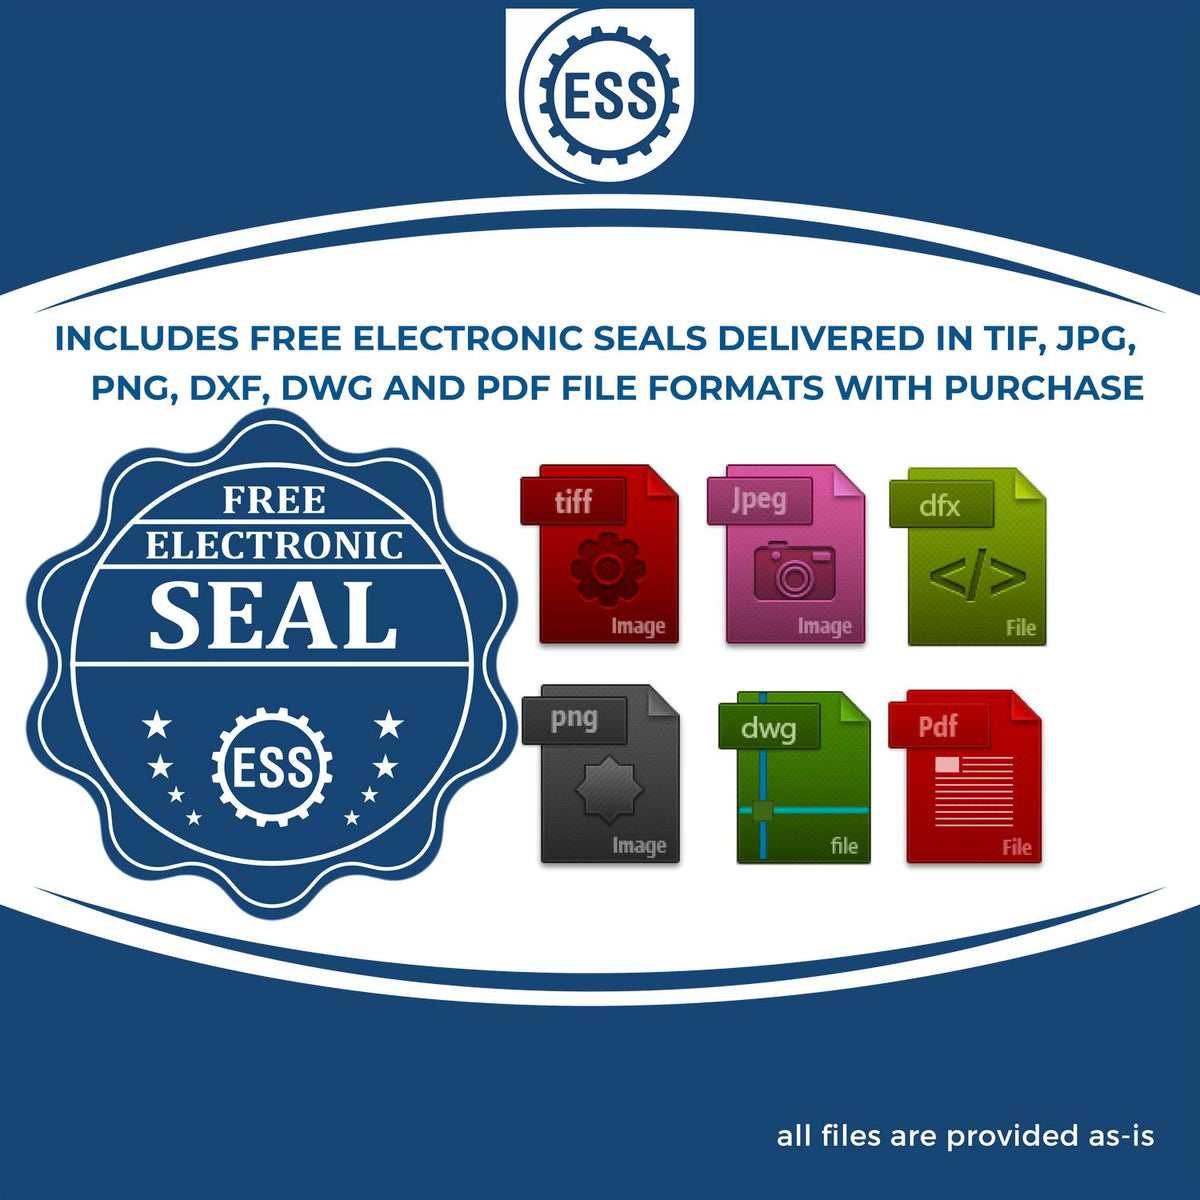 An infographic for the free electronic seal for the Premium MaxLight Pre-Inked Nevada Geology Stamp illustrating the different file type icons such as DXF, DWG, TIF, JPG and PNG.